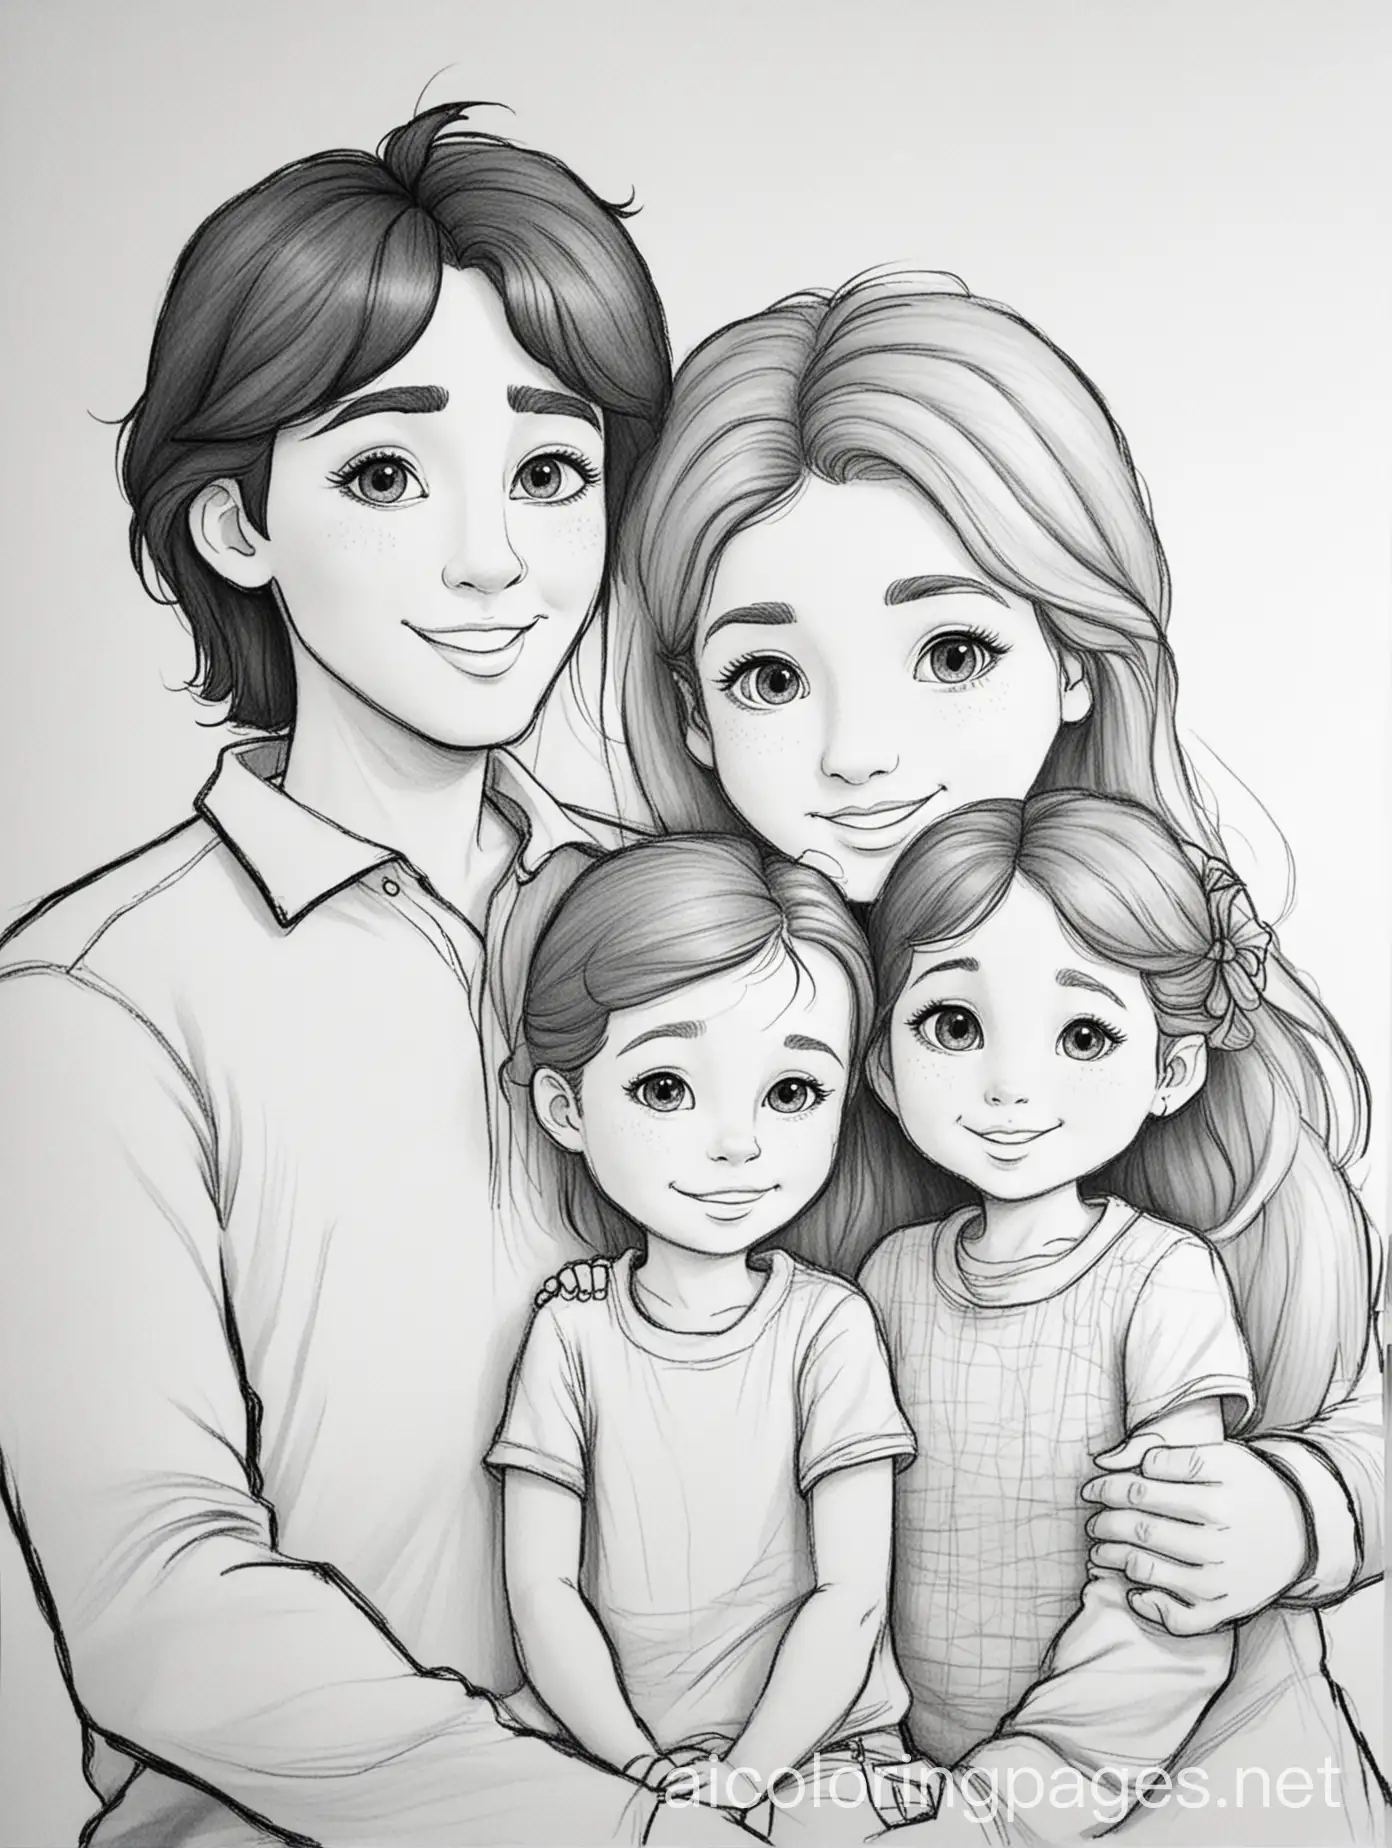 Loving Family Environment , Coloring Page, black and white, line art, white background, Simplicity, Ample White Space. The background of the coloring page is plain white to make it easy for young children to color within the lines. The outlines of all the subjects are easy to distinguish, making it simple for kids to color without too much difficulty